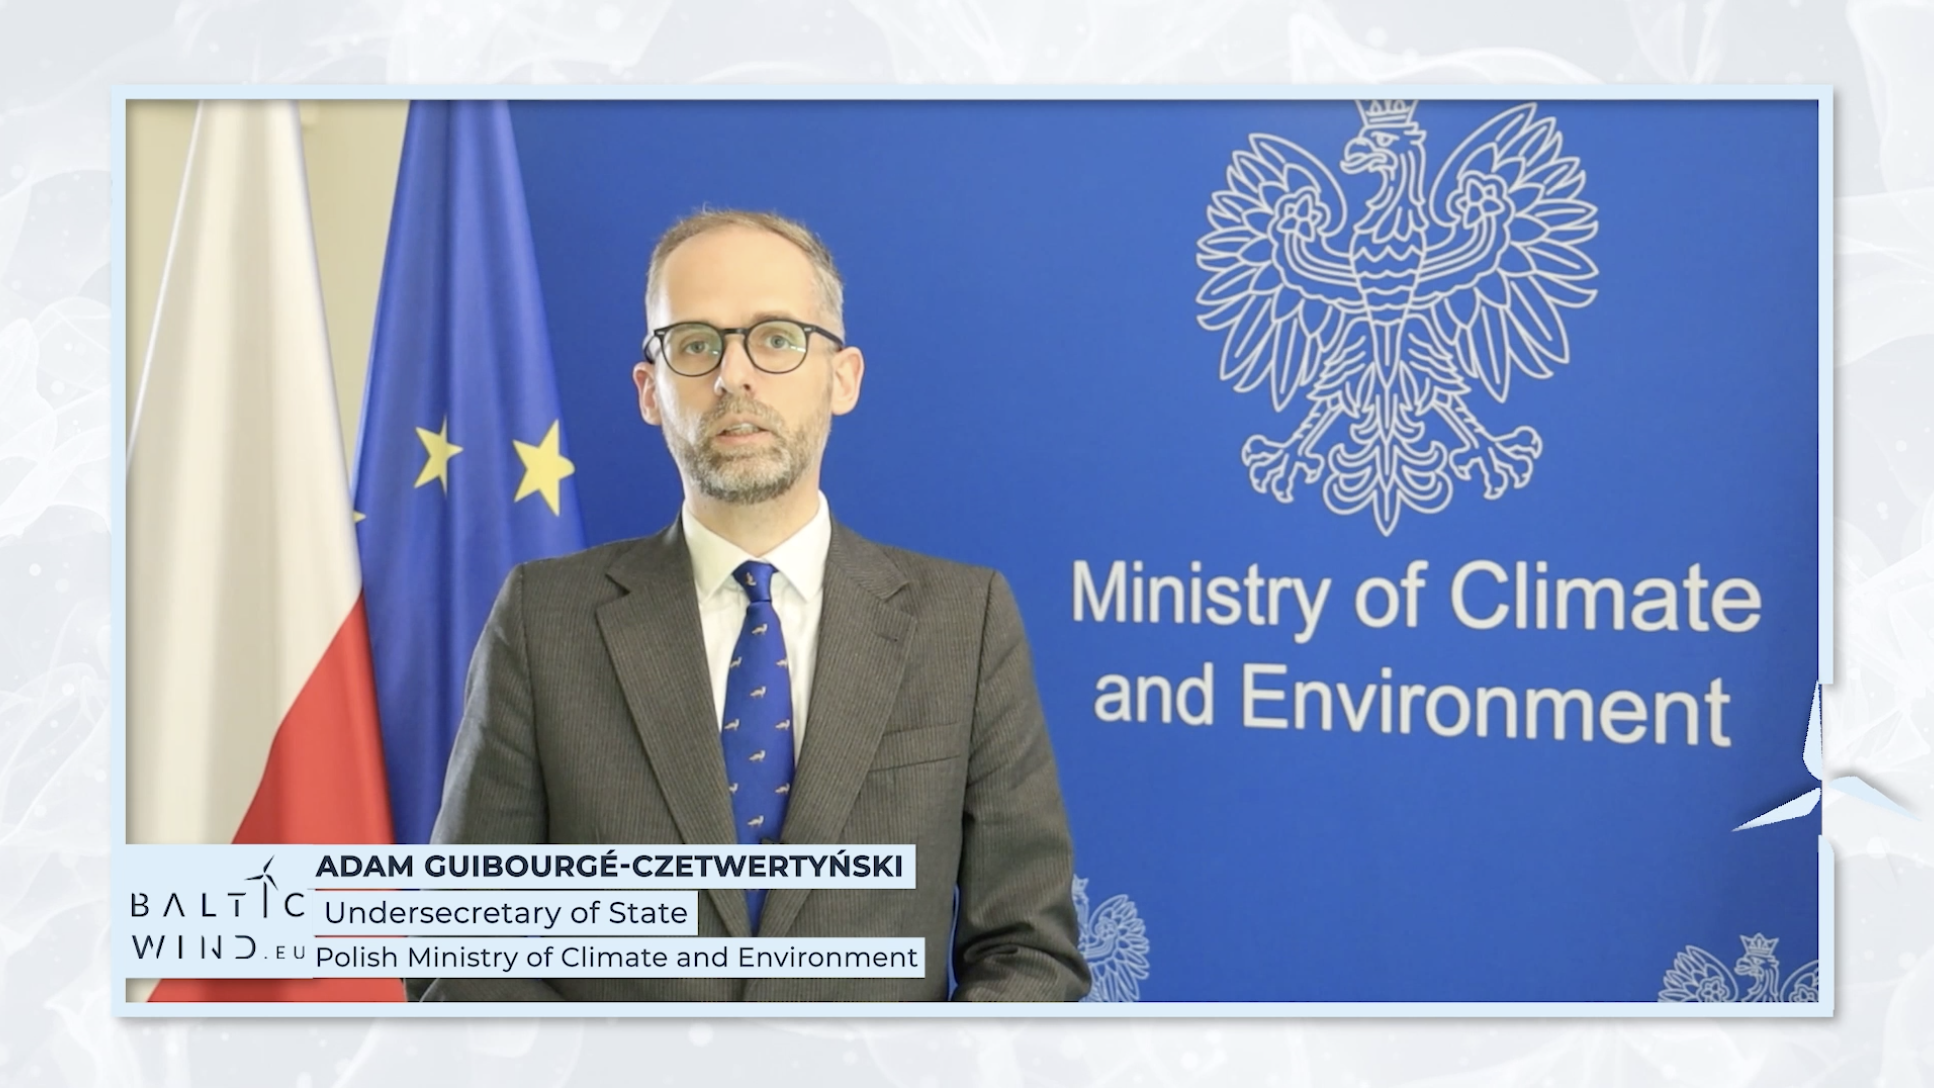 Guibourgé-Czetwertyński, Undersecretary of State Polish Ministry of Climate and Environment